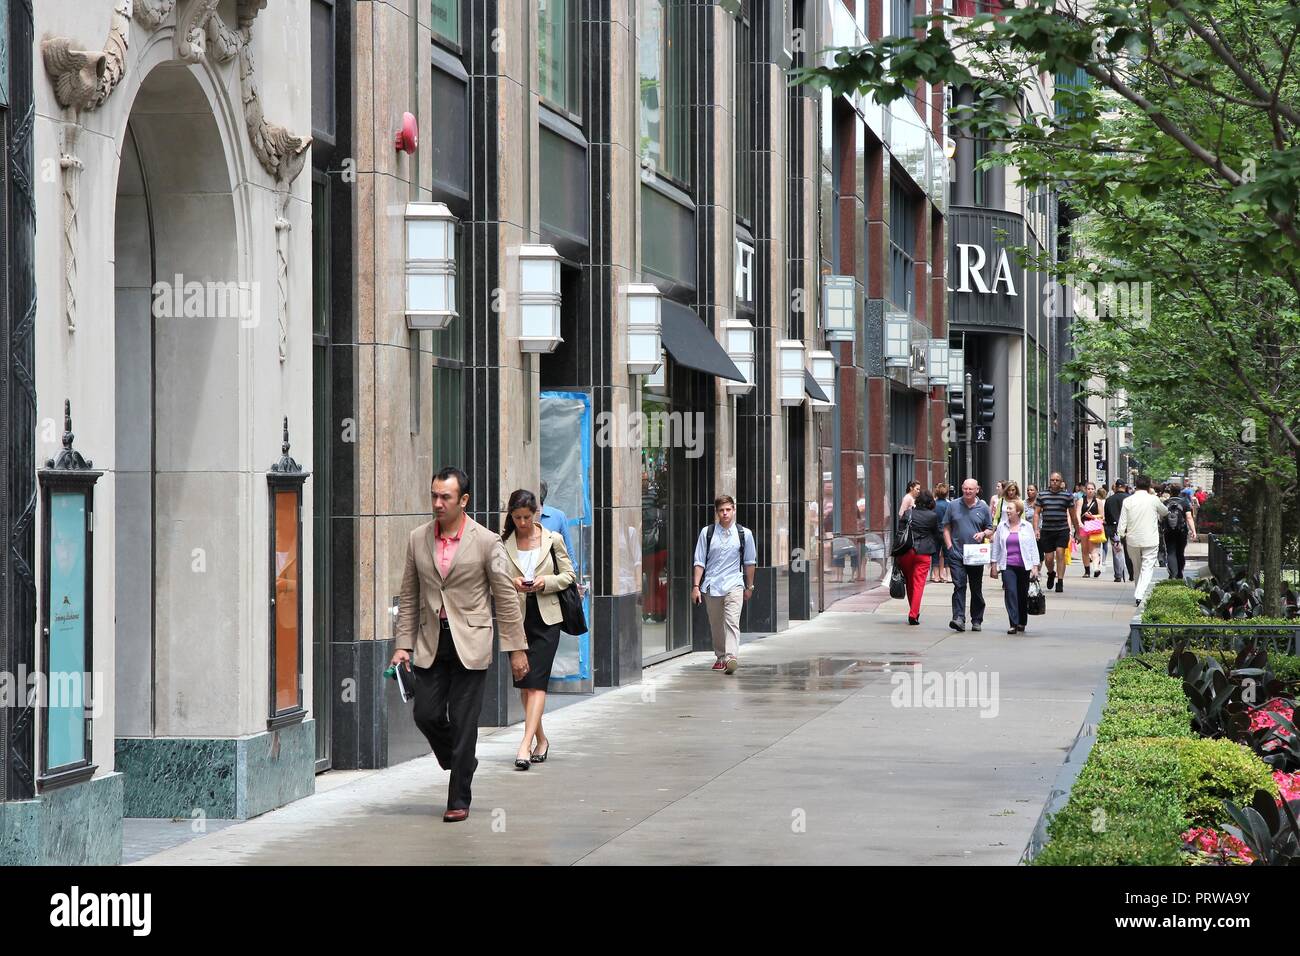 CHICAGO, USA - JUNE 26, 2013: People walk the famous Magnificent Mile of Michigan Avenue in Chicago. It is Chicago's major shopping destination and on Stock Photo